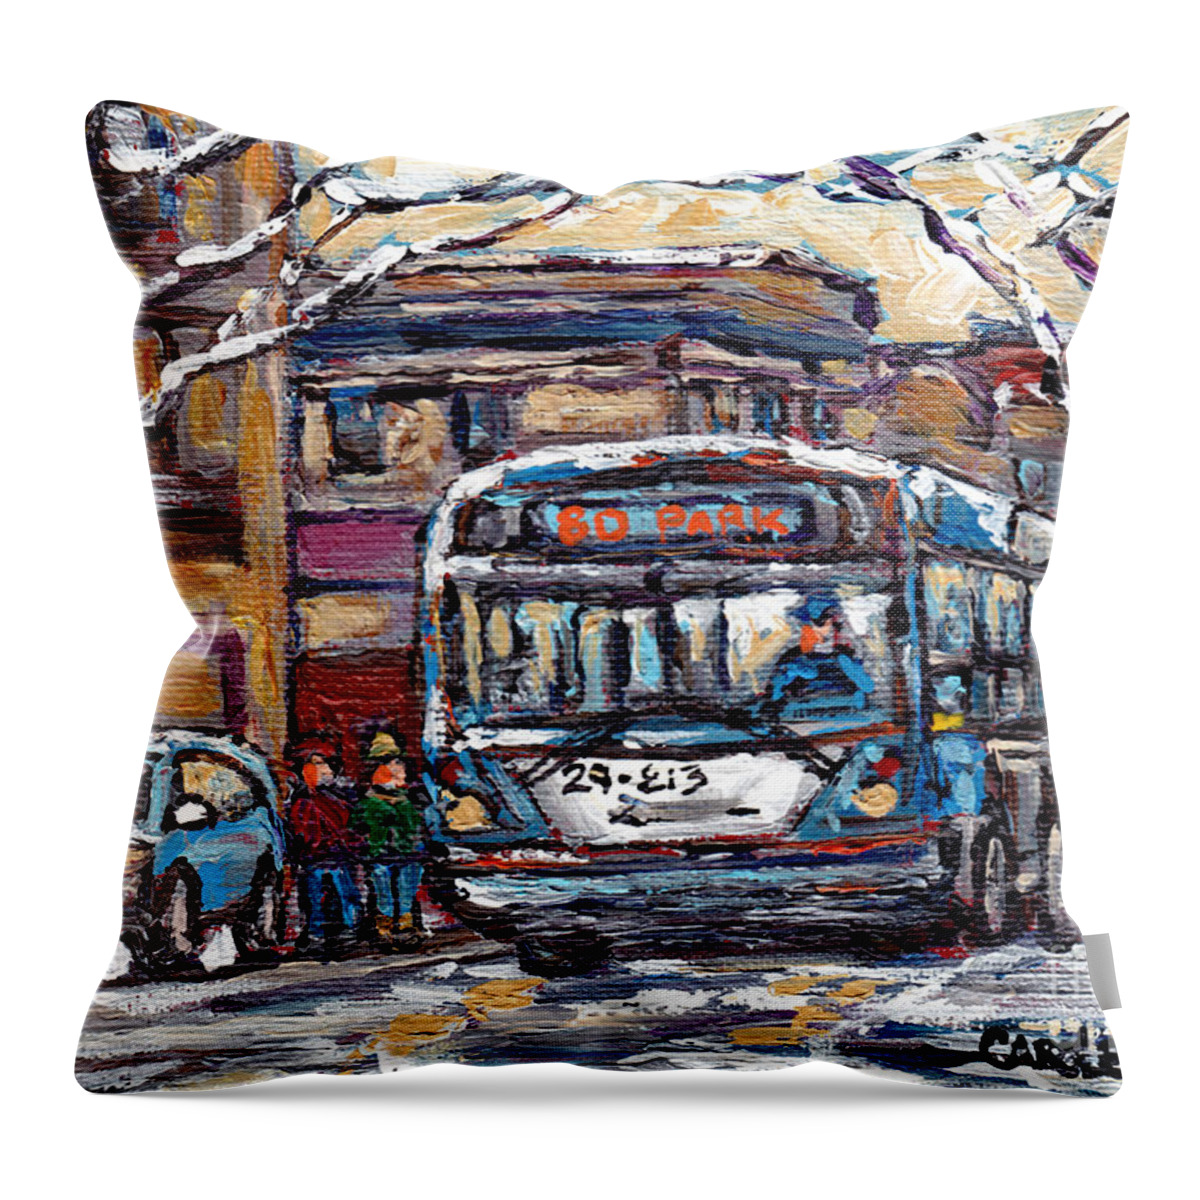 Montreal Bus Throw Pillow featuring the painting Park Avenue Winterscene Paintings For Sale All Aboard The 80 Bus Montreal Art For Sale C Spandau   by Carole Spandau